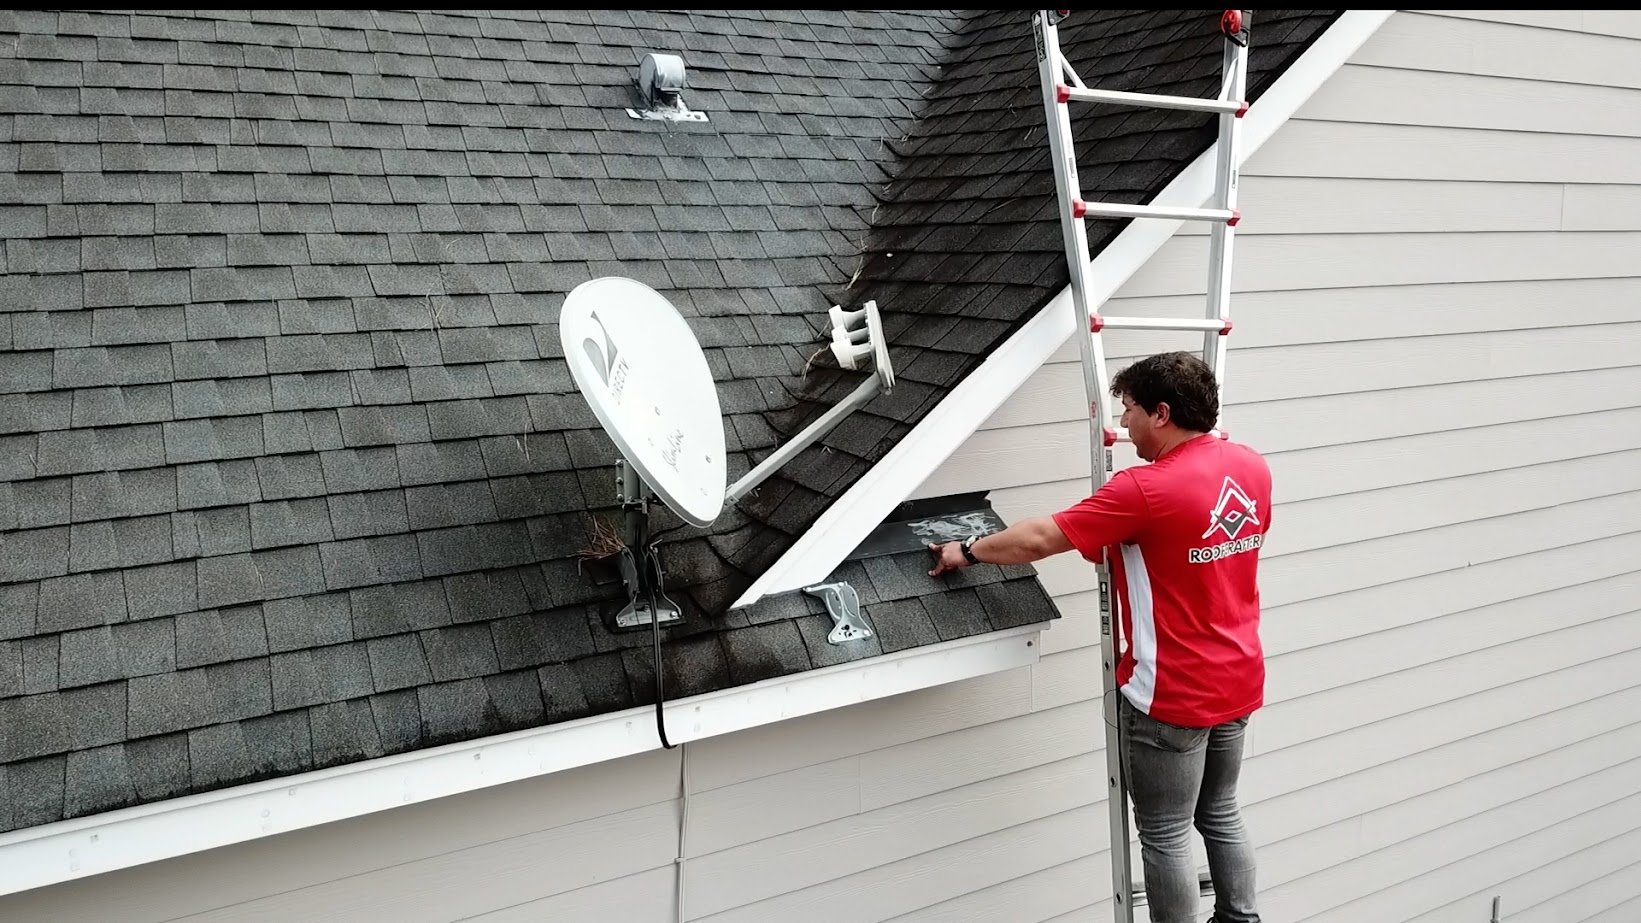 Roofcrafters estimator inspecting a roof on a ladder